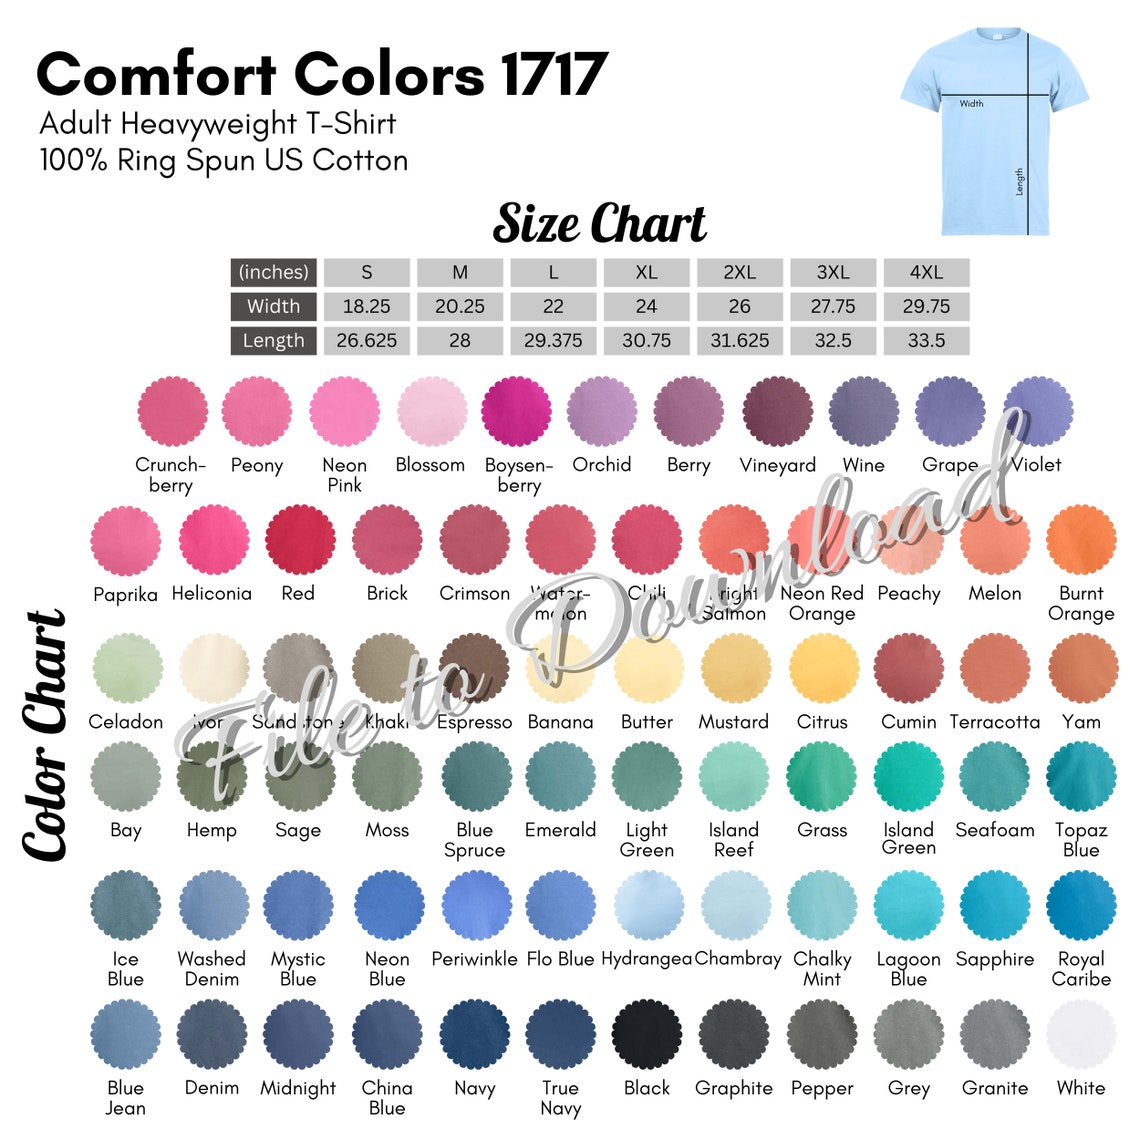 Editable Comfort Colors 1717 Color Chart and Size Chart, Comfort Colors ...